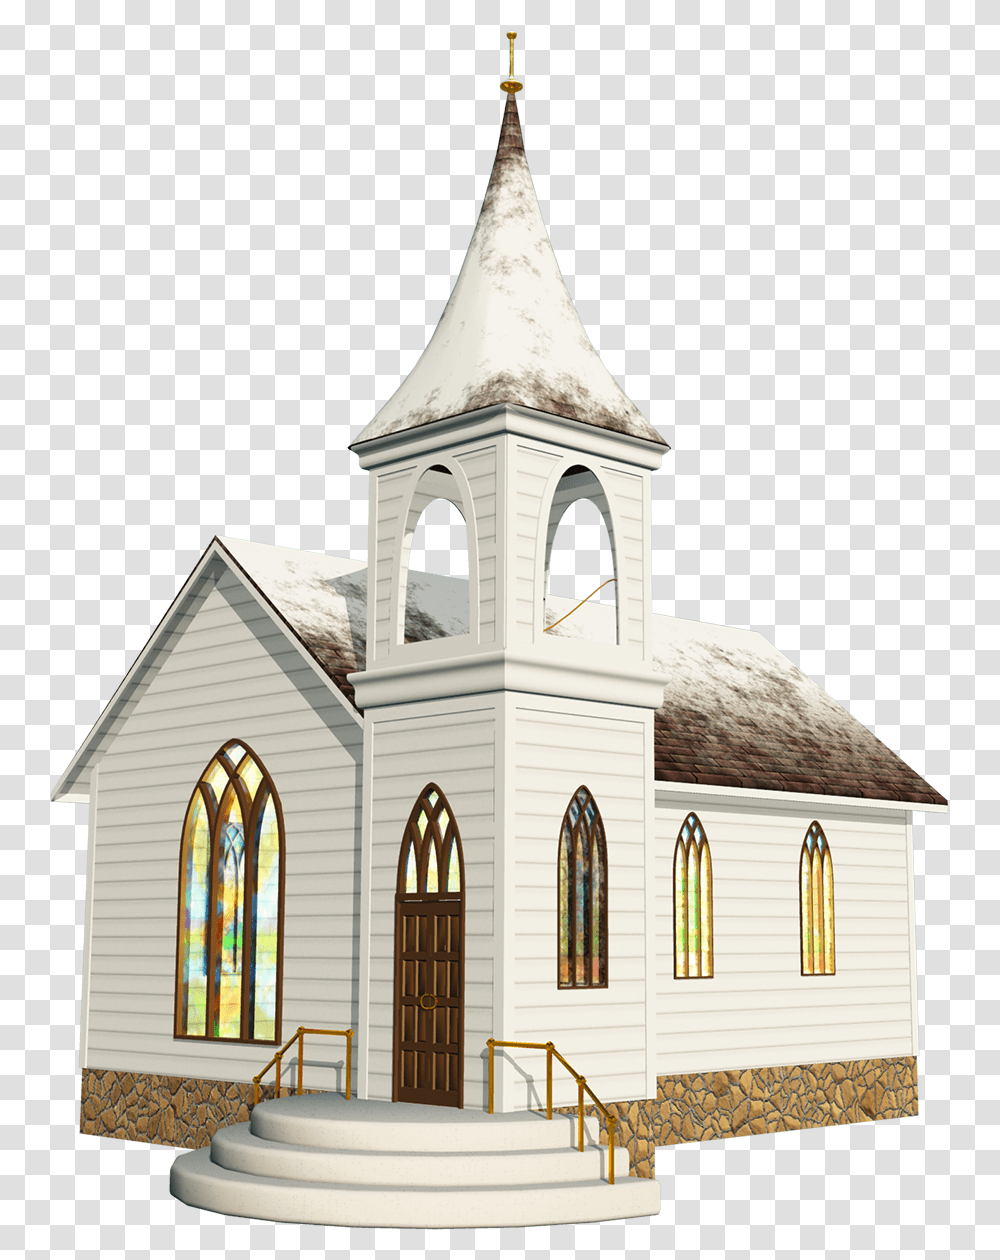 Christian Church Chapel Clip Art Background Church, Spire, Tower, Architecture, Building Transparent Png